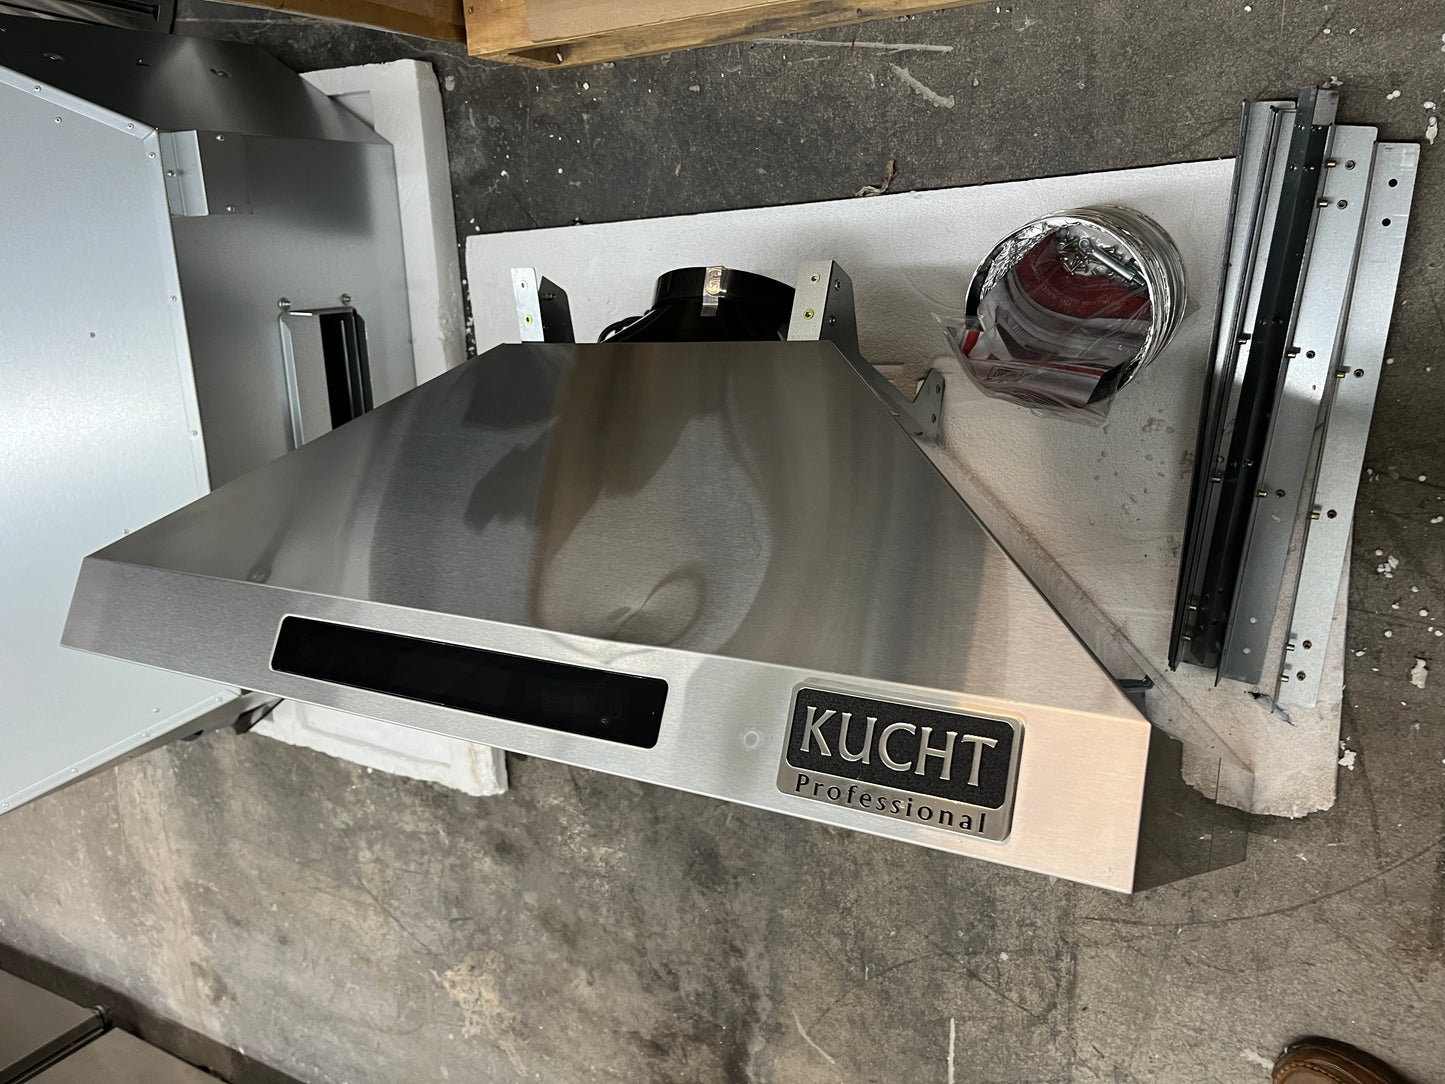 Kucht KRH3612IS Professional Series 36 Inch Pro Style Island Mount Ducted Hood 900 CFM, LED Lights, LED Lighting, Stainless Steel Baffle Filter, Remote Control, Dishwasher Safe Filters in Stainless Steel, 369240